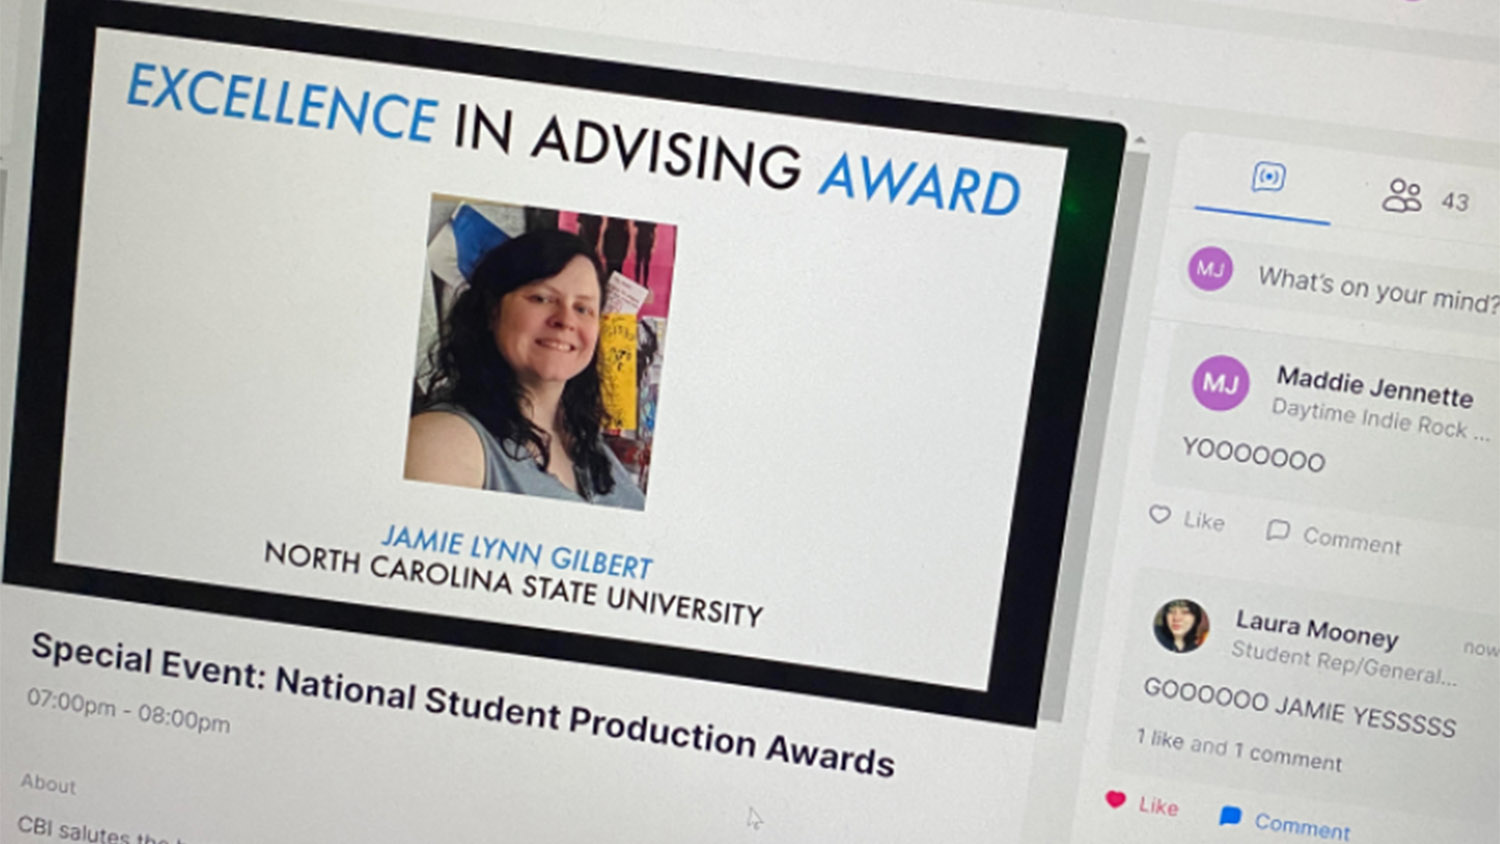 A screen shot showing Jamie Lynn Gilbert as the winner of the Excellence in Advising Award from CBI